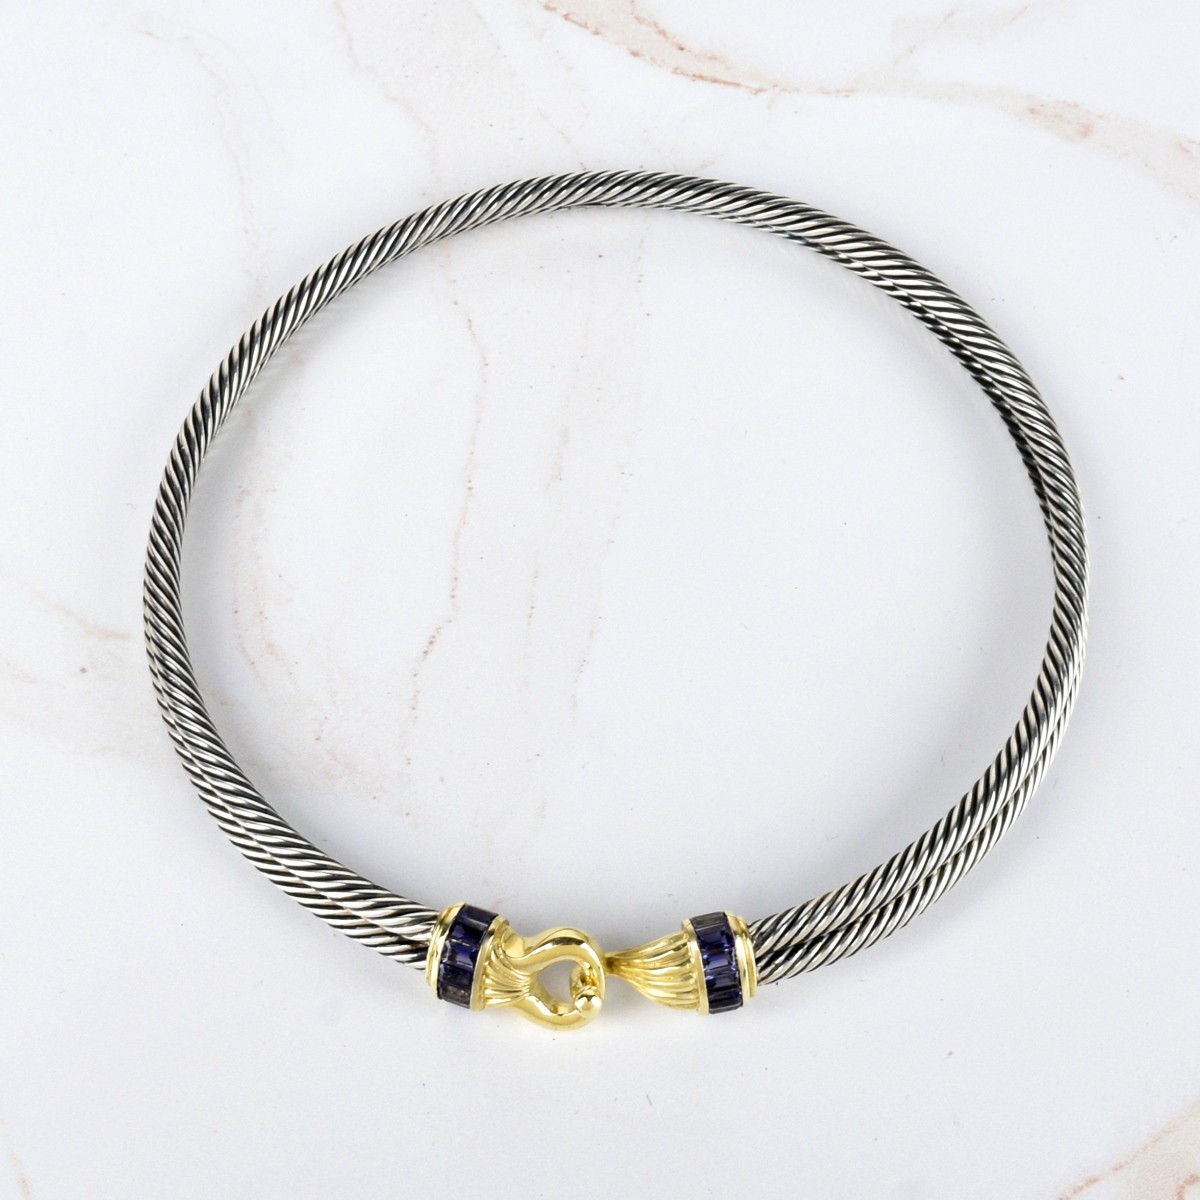 Gemstone, 14K and Silver Choker Necklace